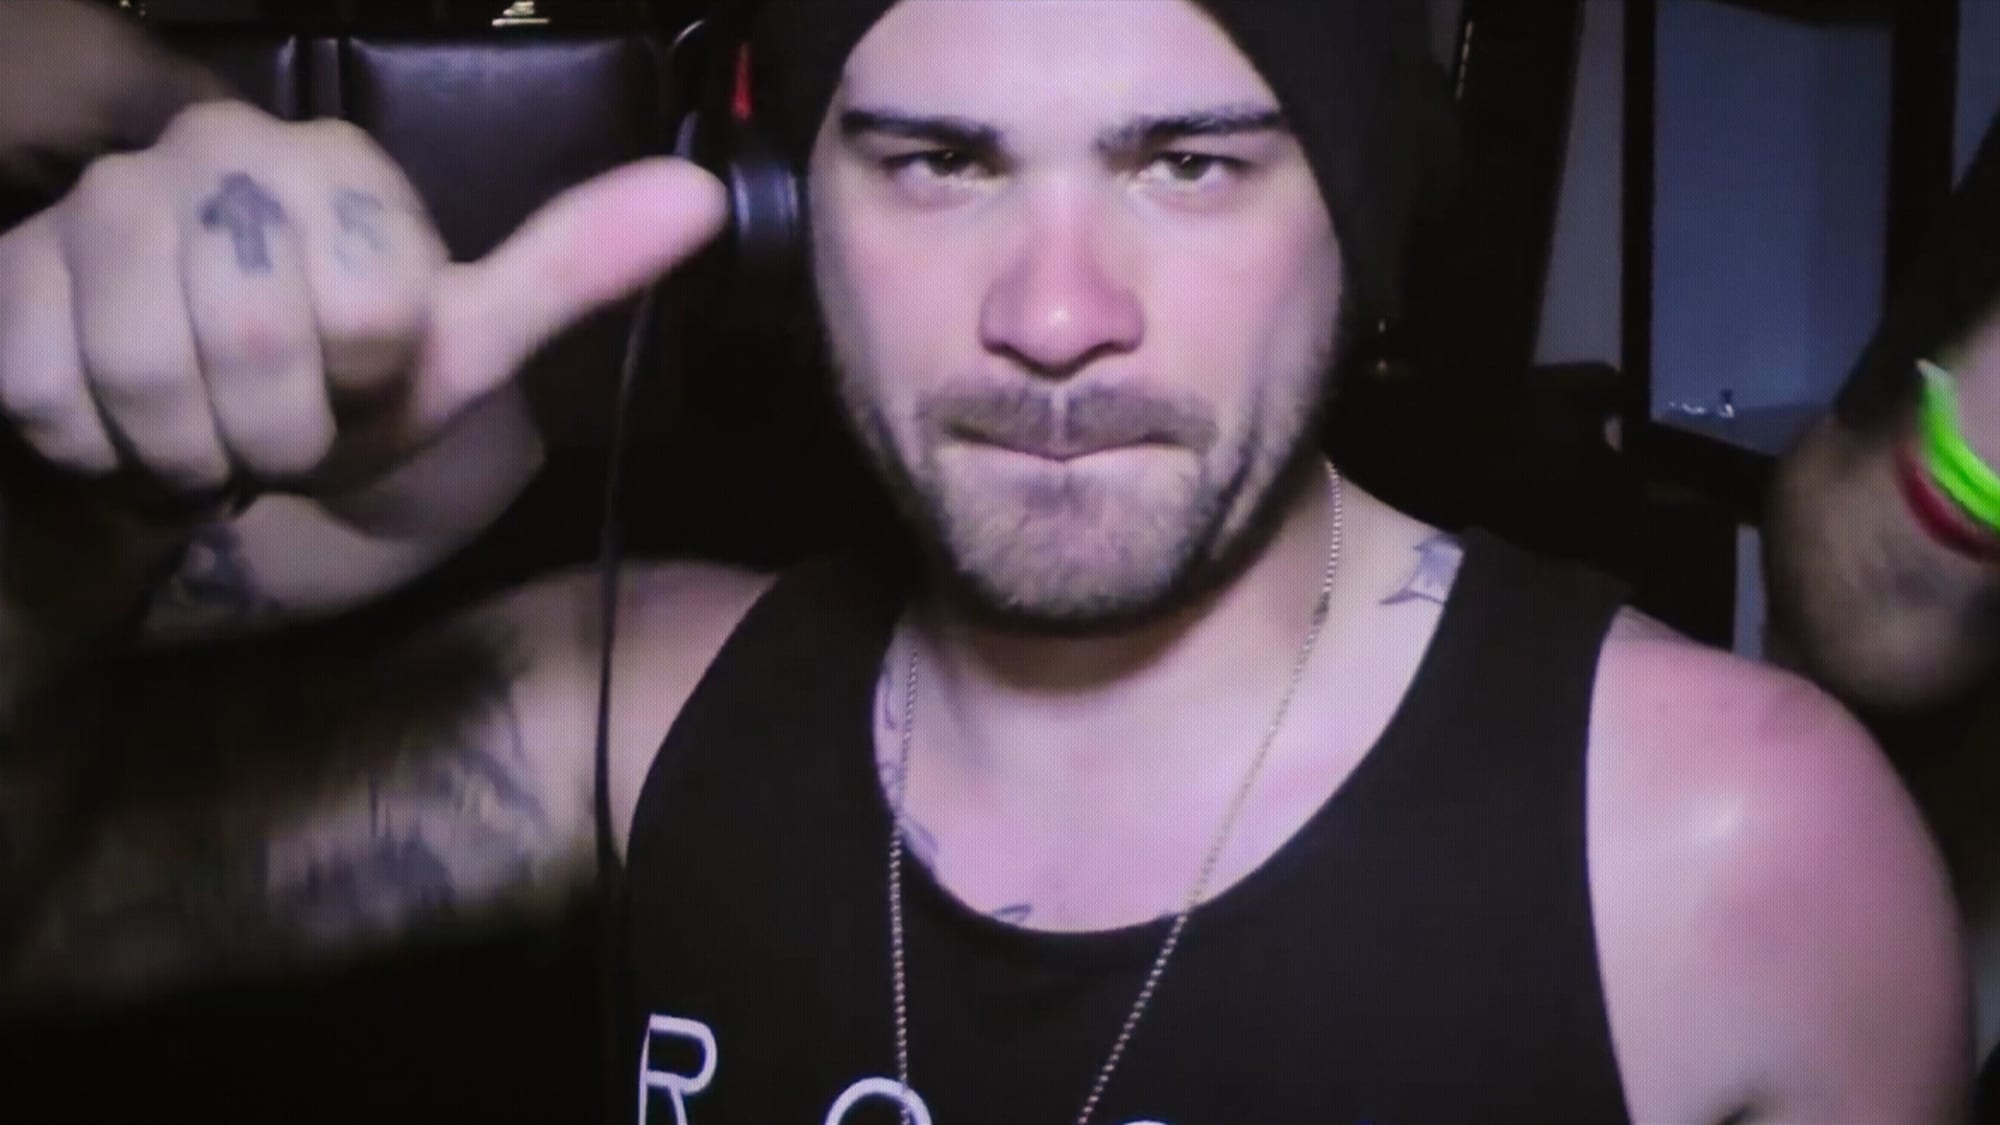 The Most Hated Man on the Internet: Where is Hunter Moore in 2022?